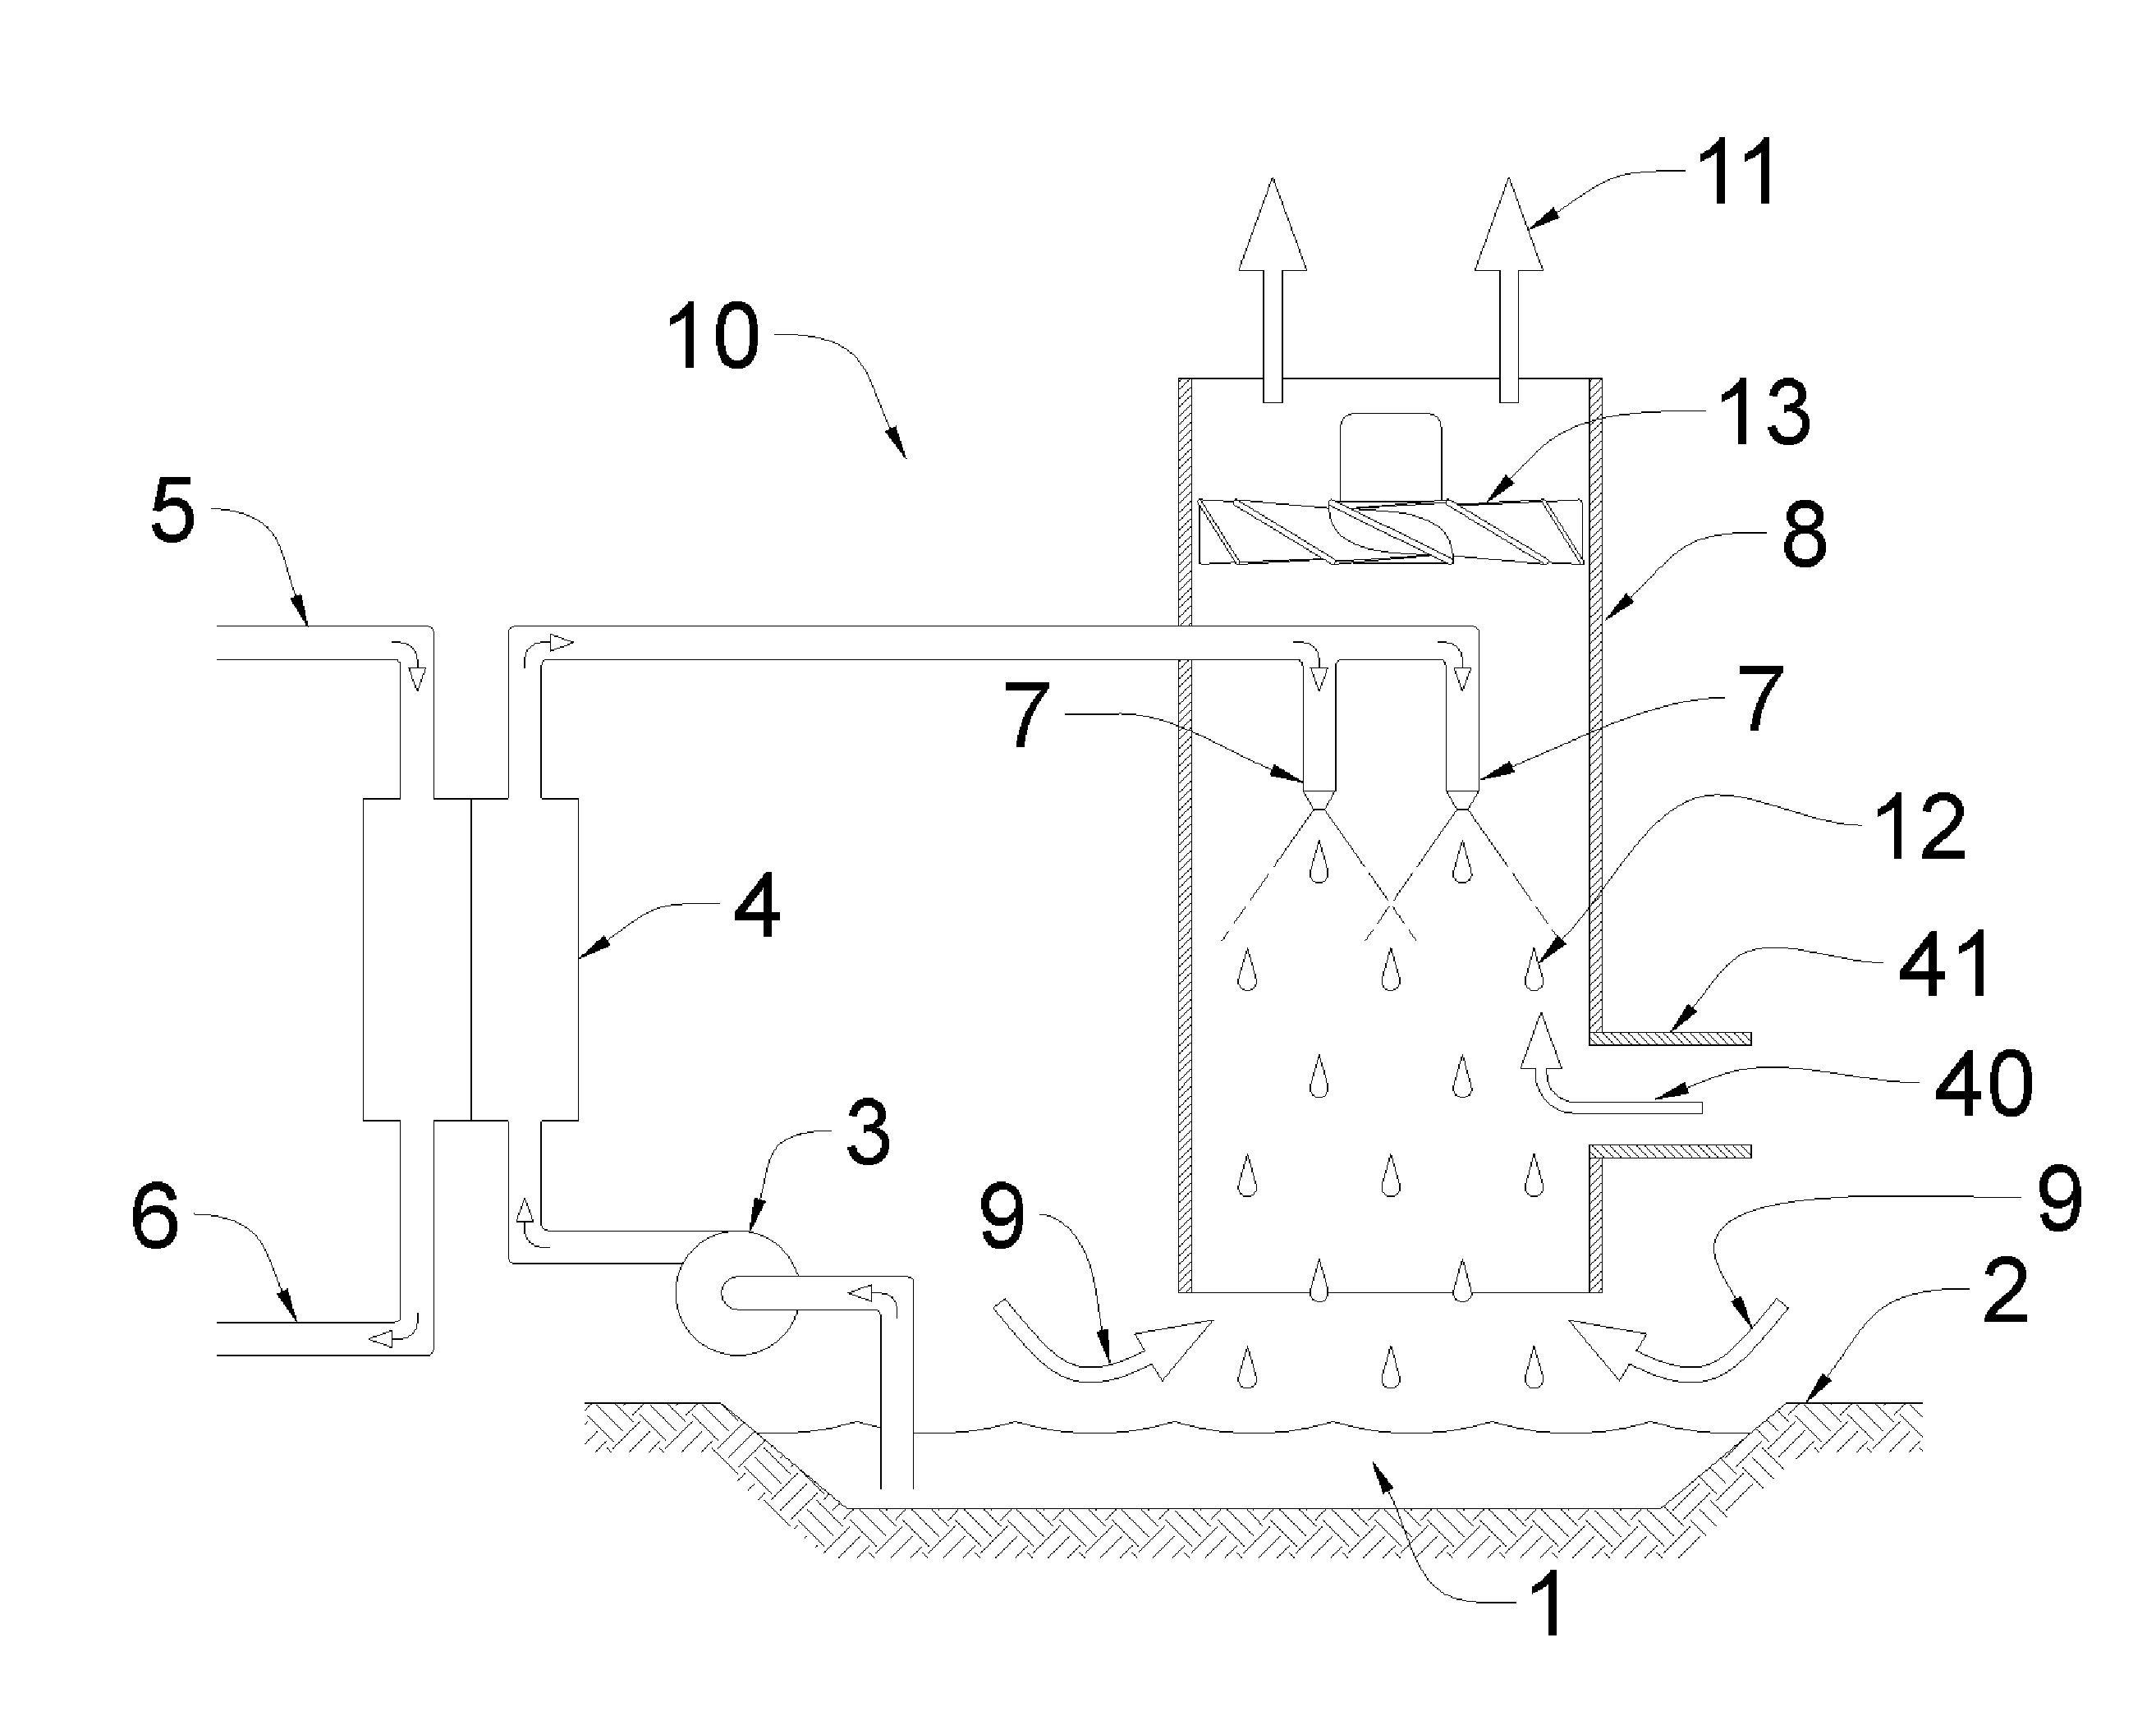 Heat dissipation systems with hygroscopic working fluid